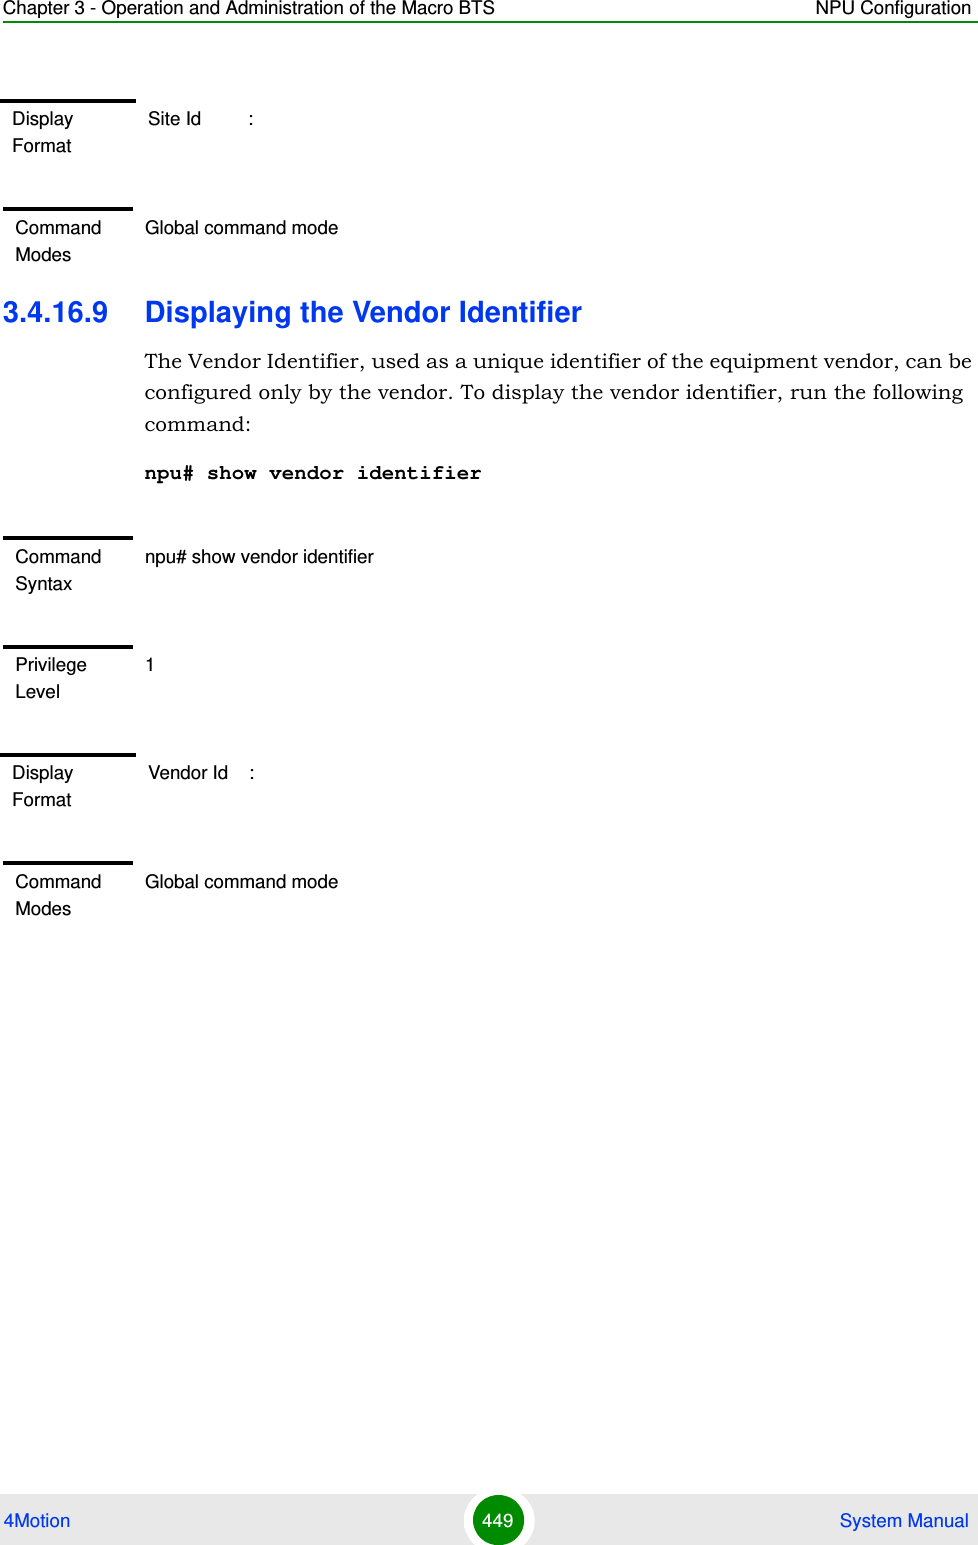 Chapter 3 - Operation and Administration of the Macro BTS NPU Configuration4Motion 449  System Manual3.4.16.9 Displaying the Vendor IdentifierThe Vendor Identifier, used as a unique identifier of the equipment vendor, can be configured only by the vendor. To display the vendor identifier, run the following command:npu# show vendor identifierDisplay FormatSite Id         :Command ModesGlobal command modeCommand Syntaxnpu# show vendor identifierPrivilege Level1Display FormatVendor Id    :Command ModesGlobal command mode